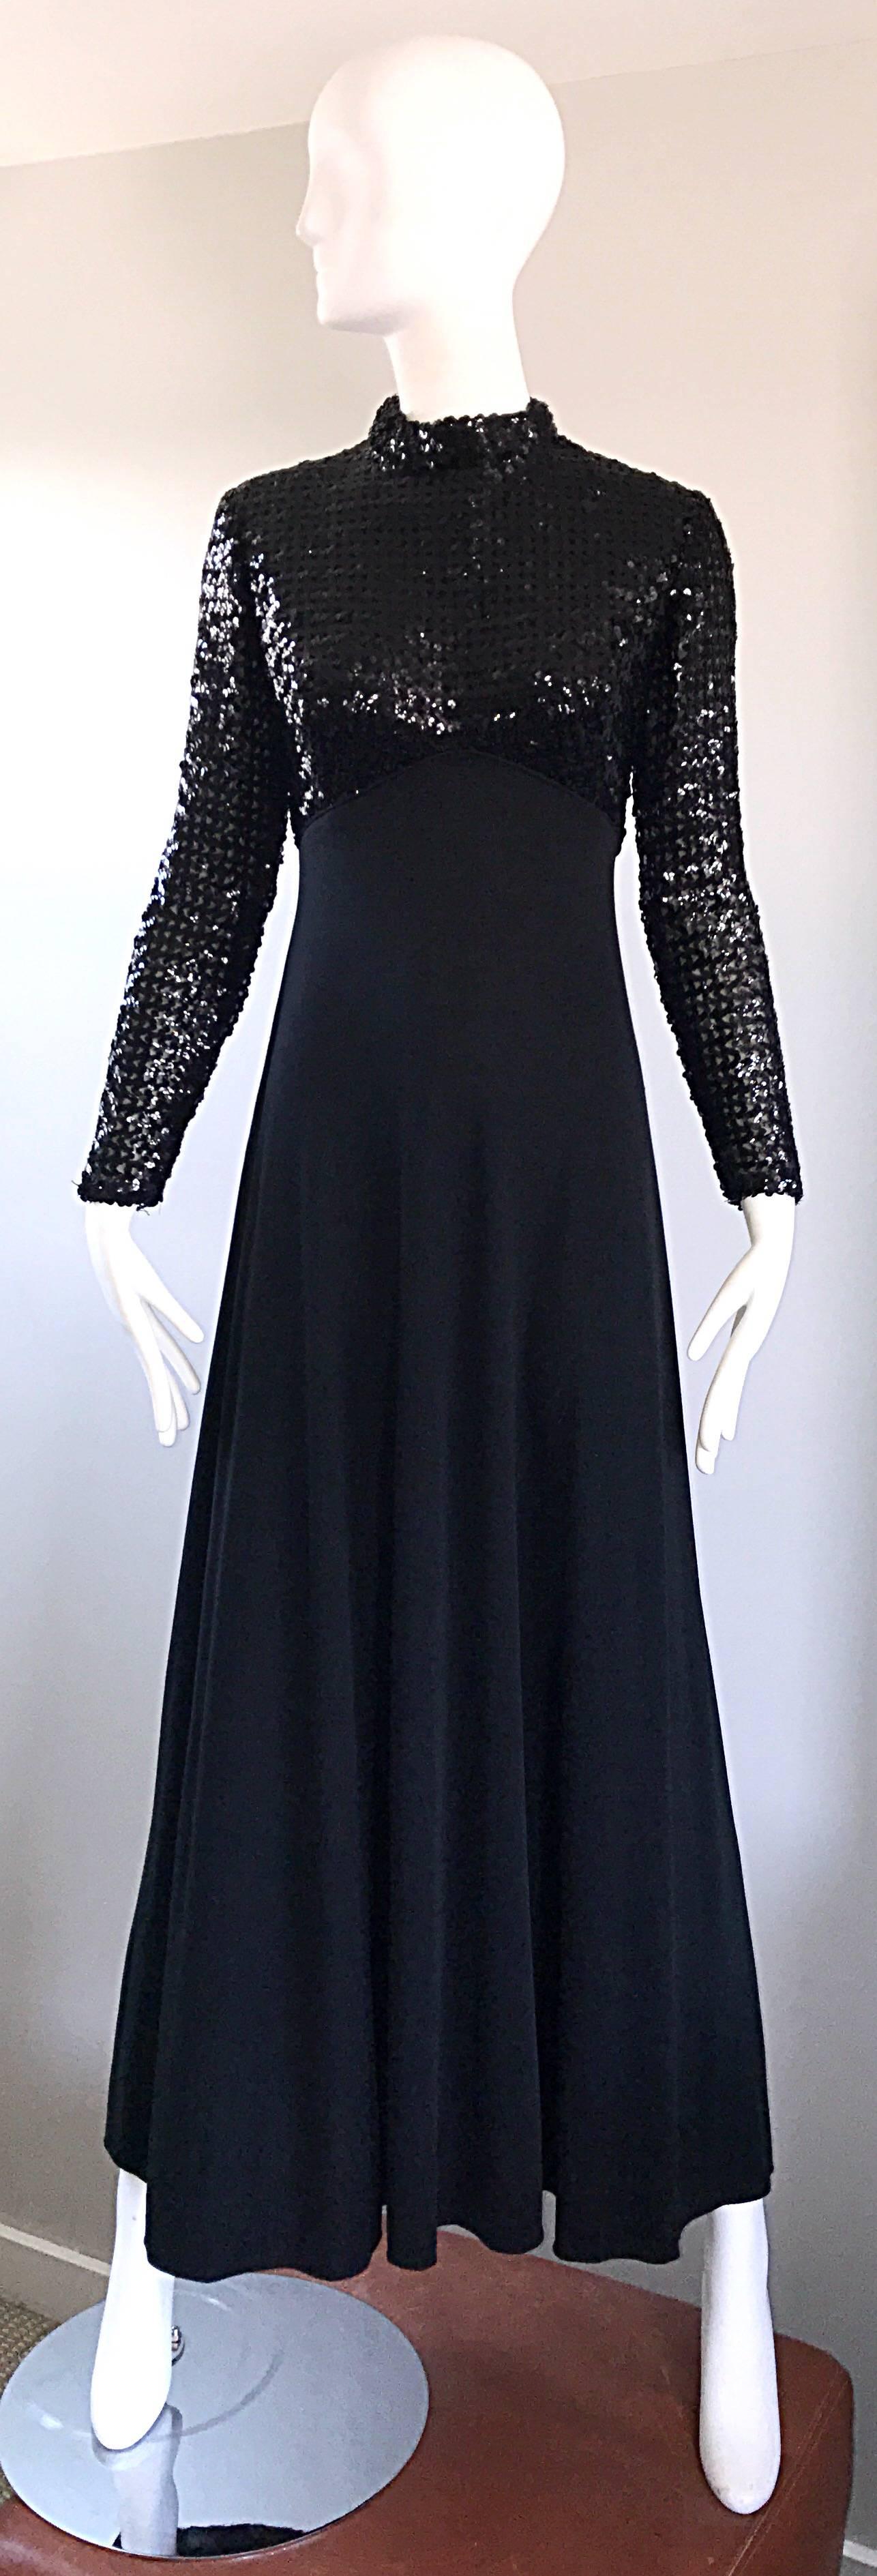 Amazing 1970s black sequin + jersey evening maxi dress! Features a fitted high neck bodice encrusted with hundreds of hand-sewn black sequins. Long tailored sleeves. Liquid jersey looks fantastic with movement. Full metal zipper up the back with